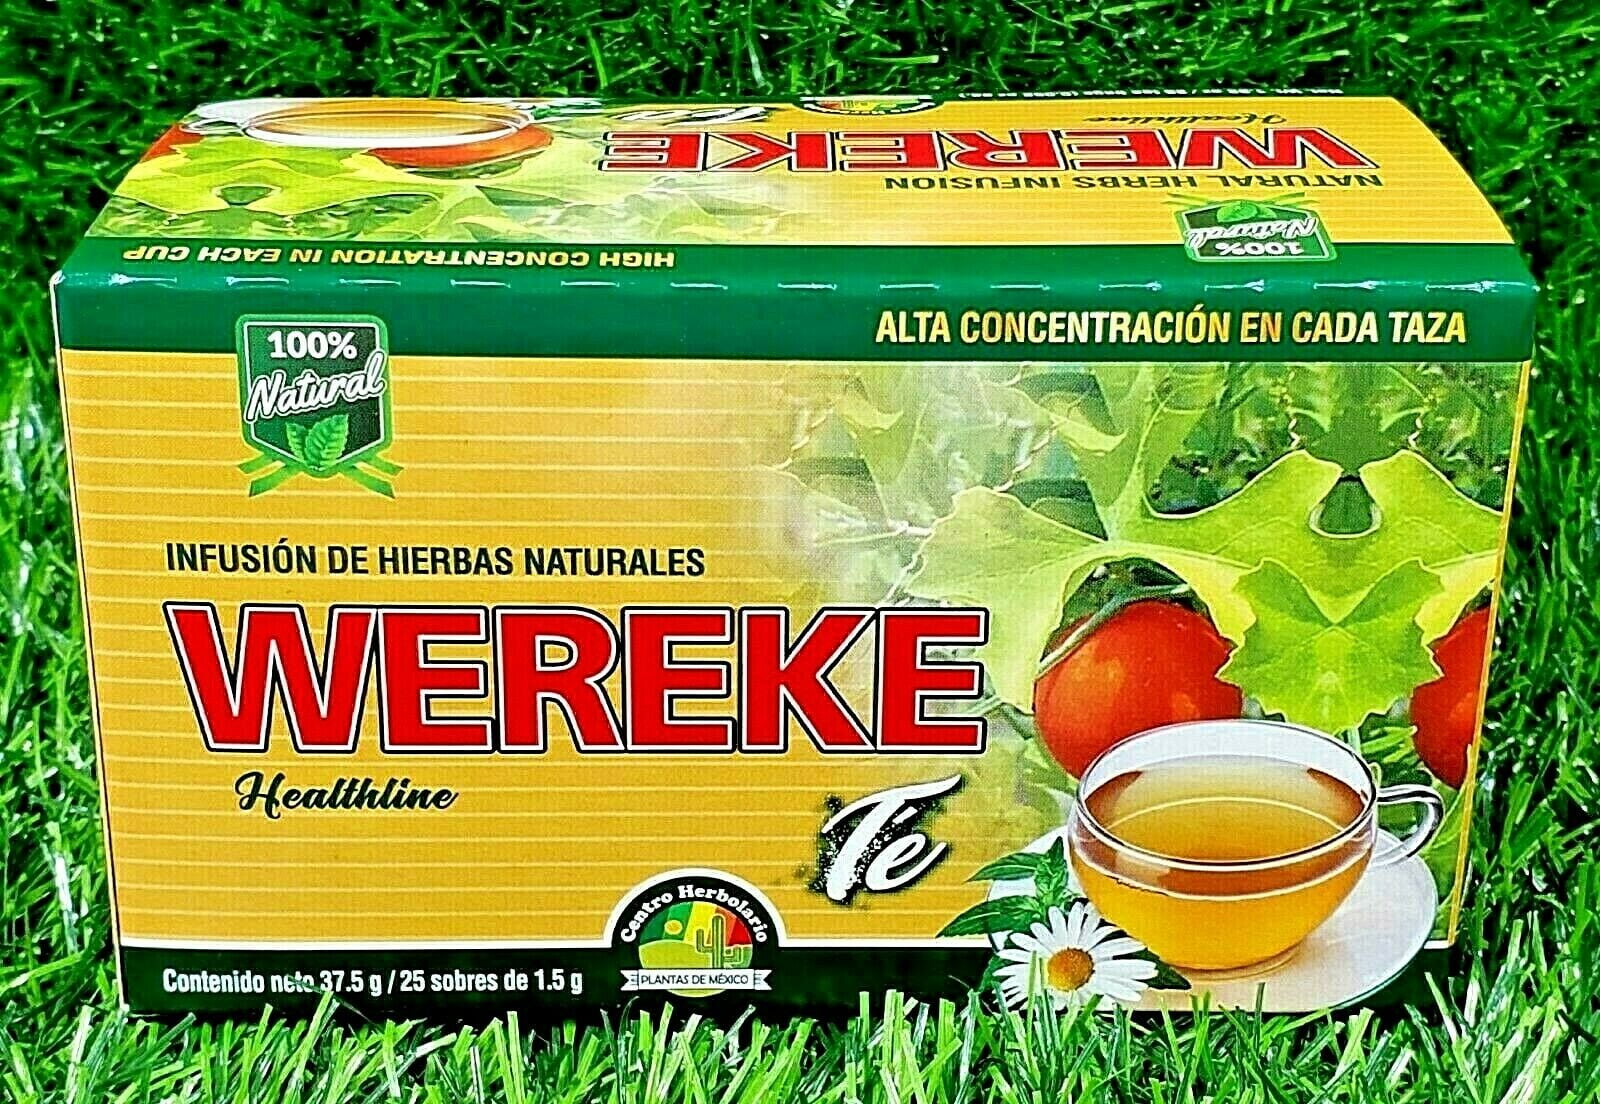 WEREKE Tea ✓ Herb Infusion Natural Gluco Support 25 bags by therbal